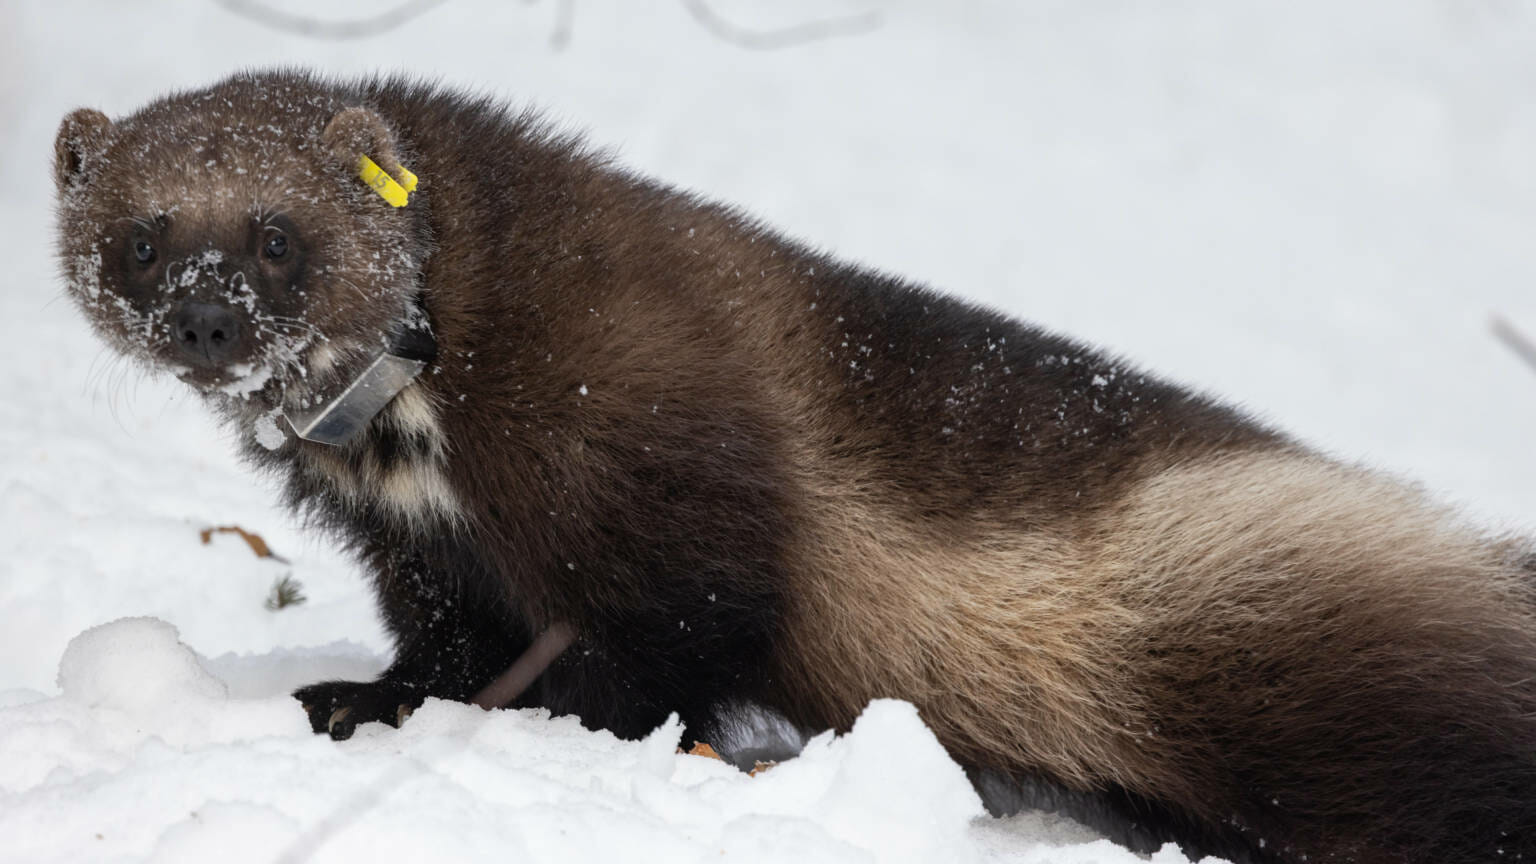 Wolverines, lynx and moose: Fish and Game screens wildlife for COVID